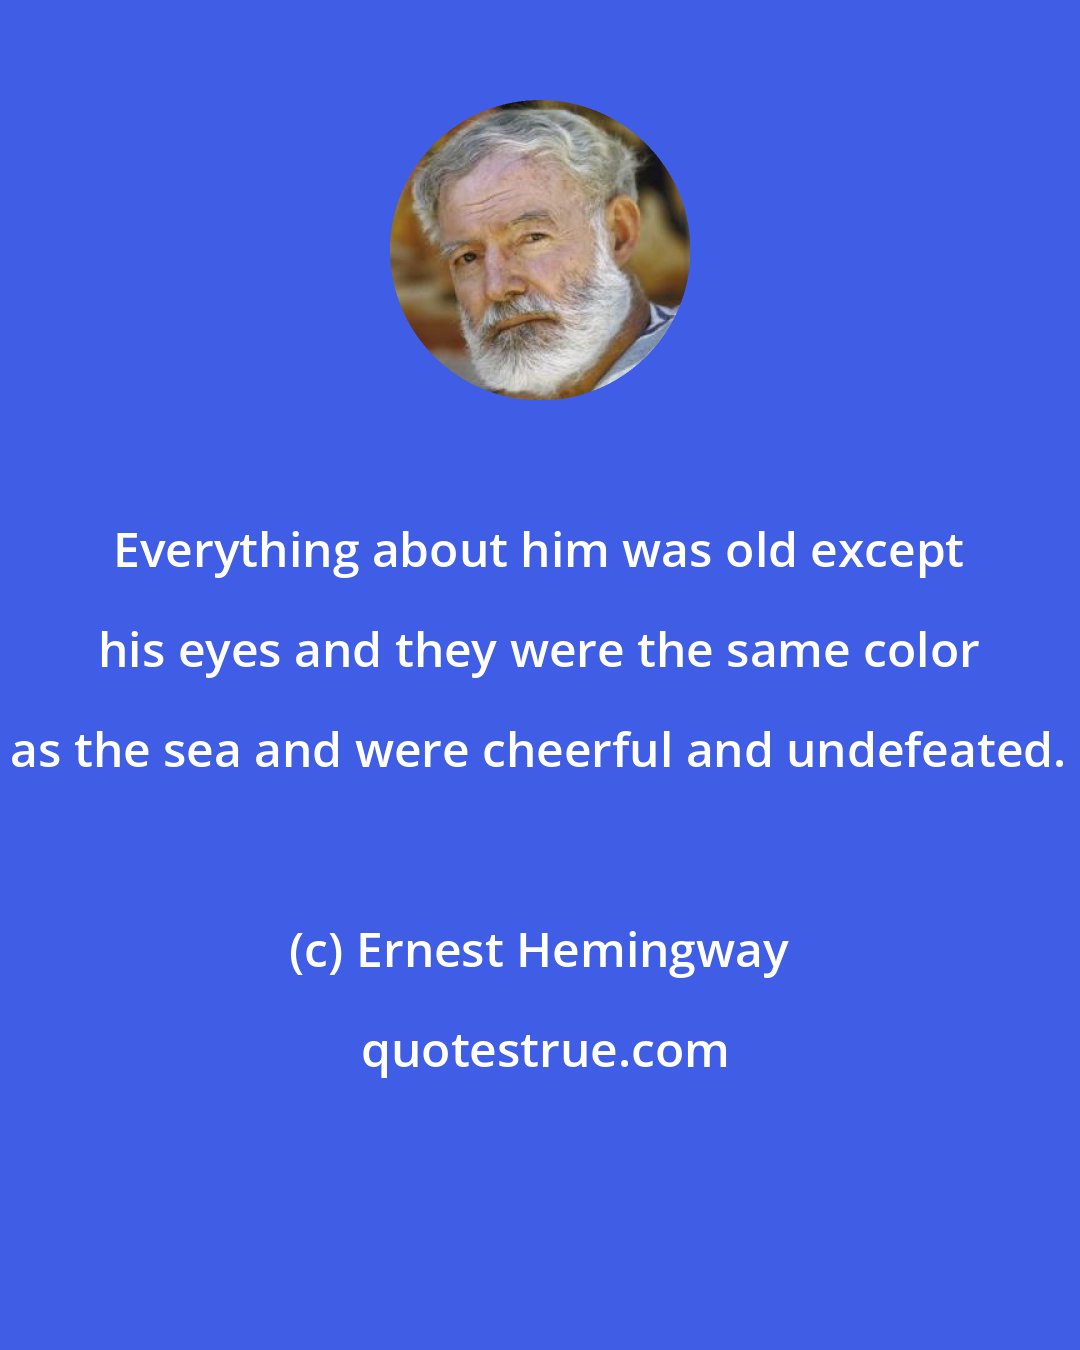 Ernest Hemingway: Everything about him was old except his eyes and they were the same color as the sea and were cheerful and undefeated.